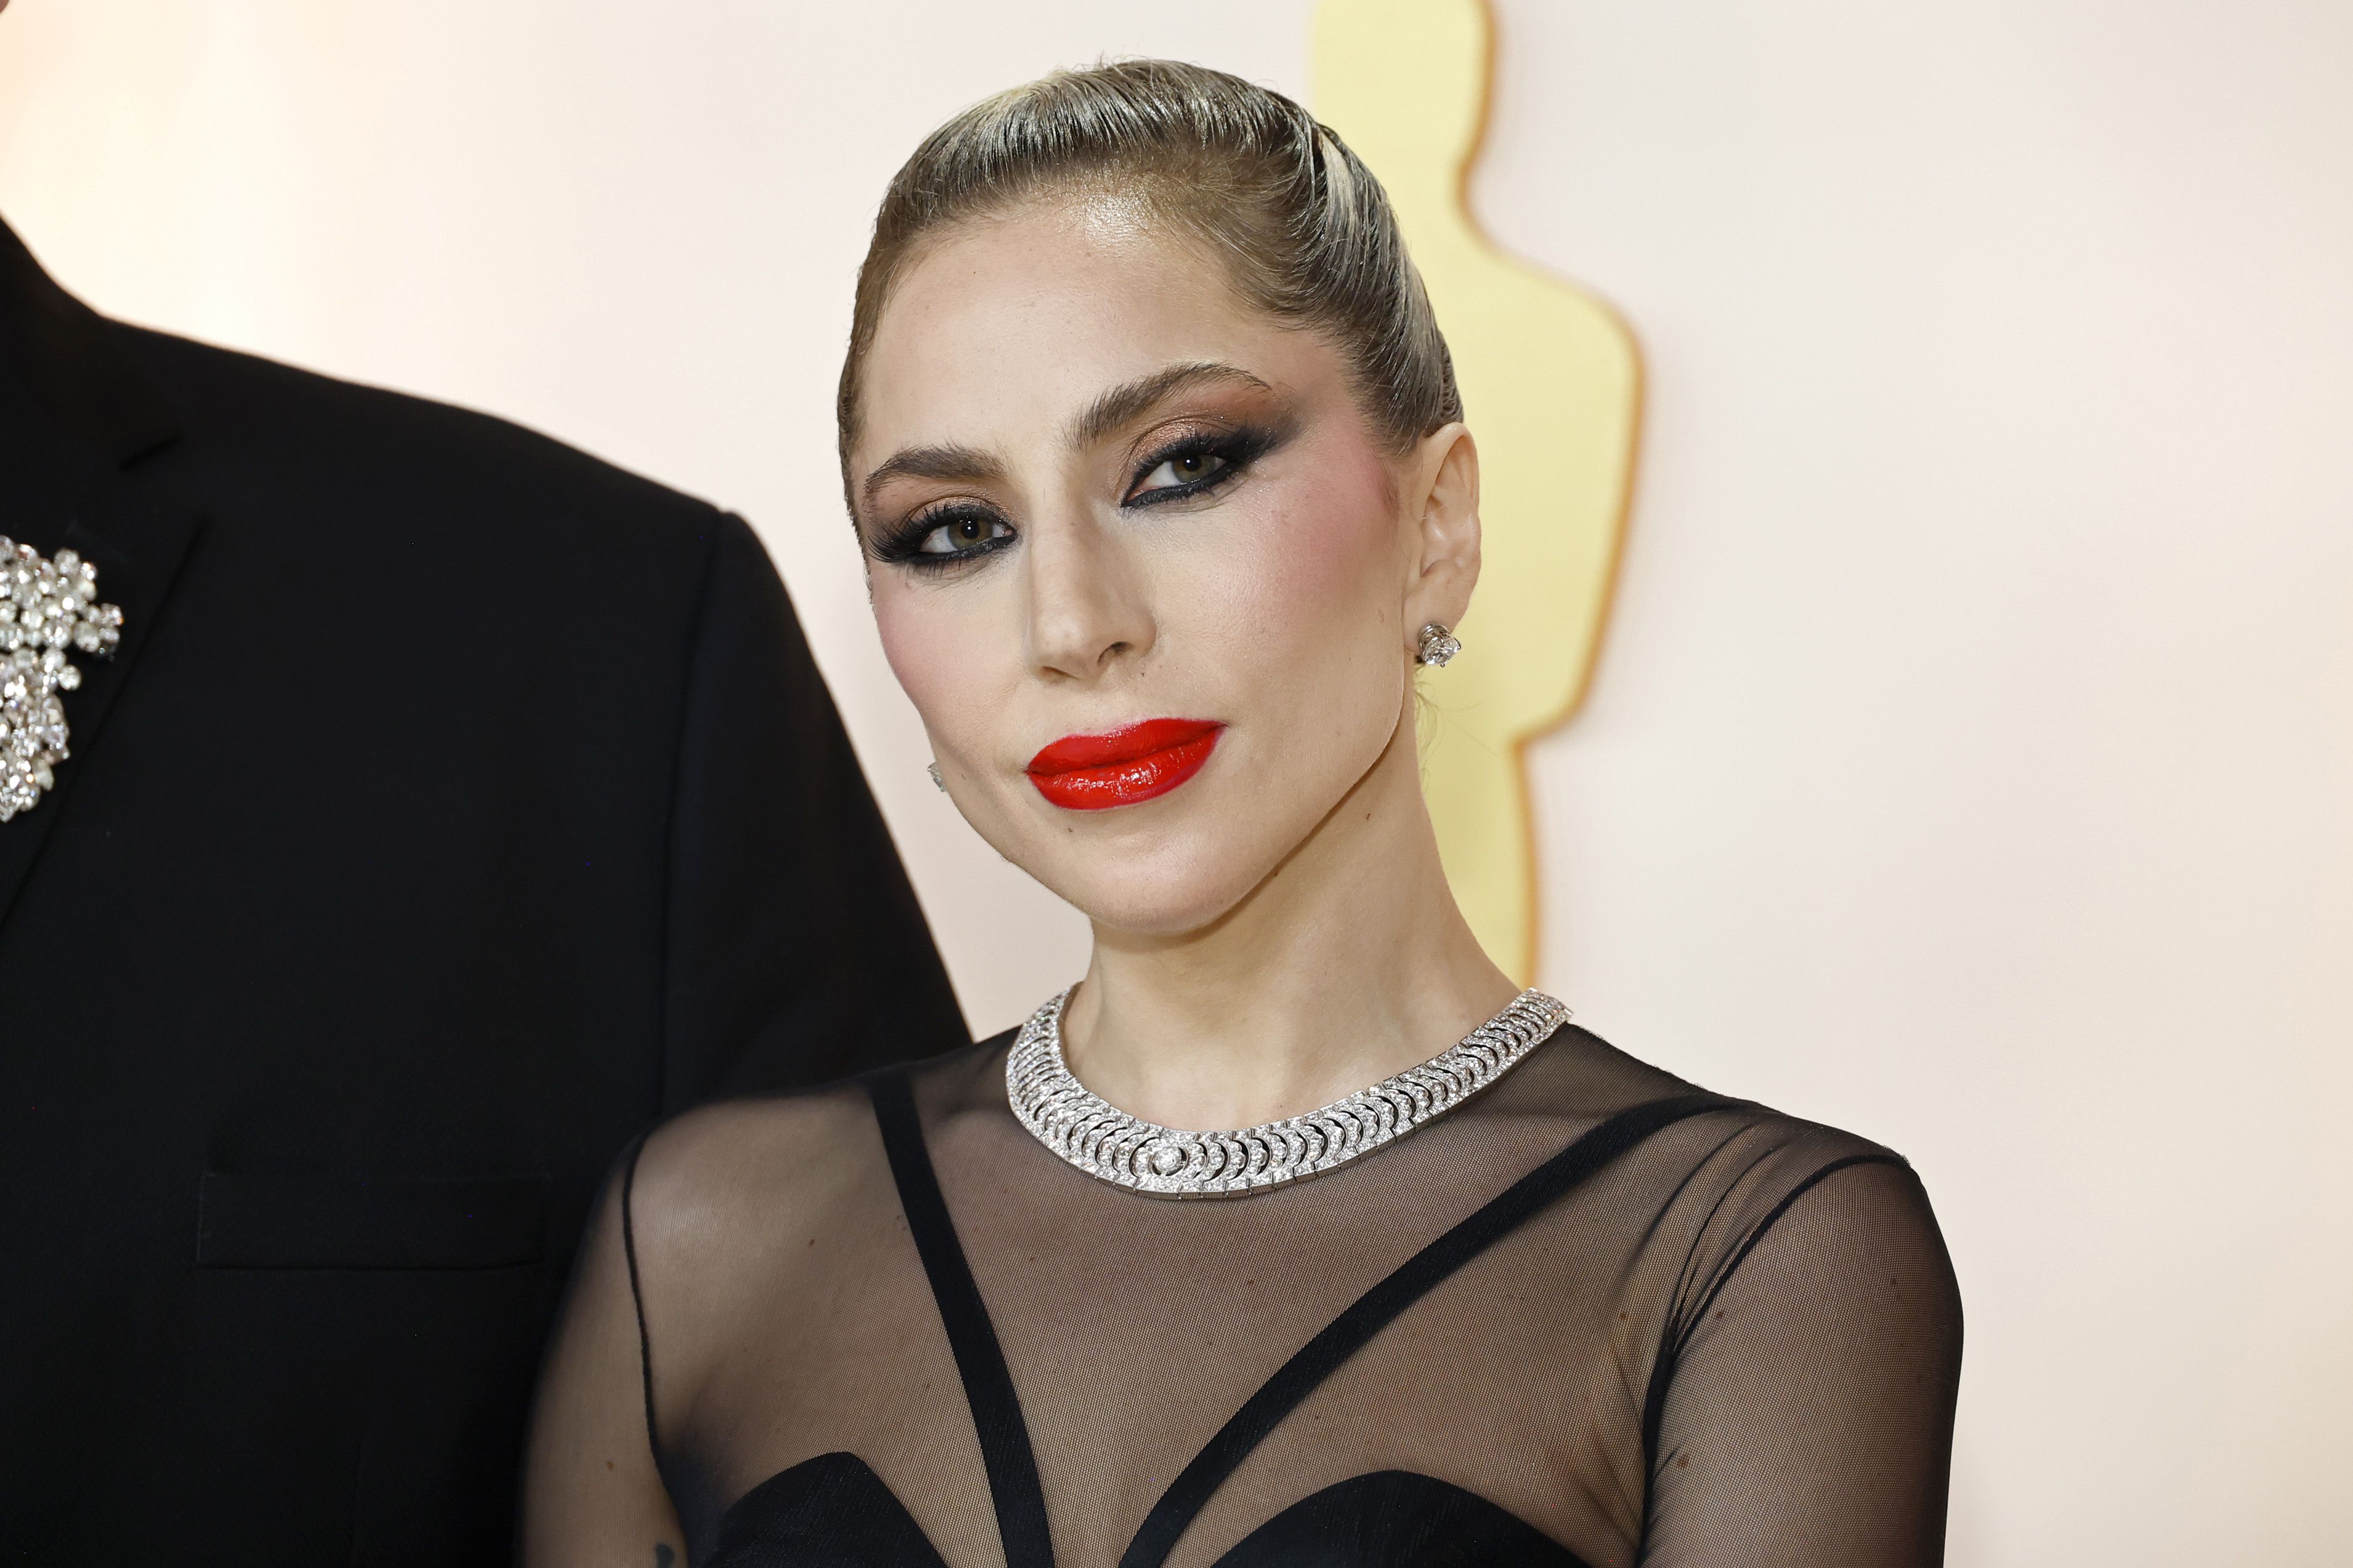 Lady Gaga Shows Peek Of 🔥 Abs, Butt In Sheer Dress In Oscars Pics